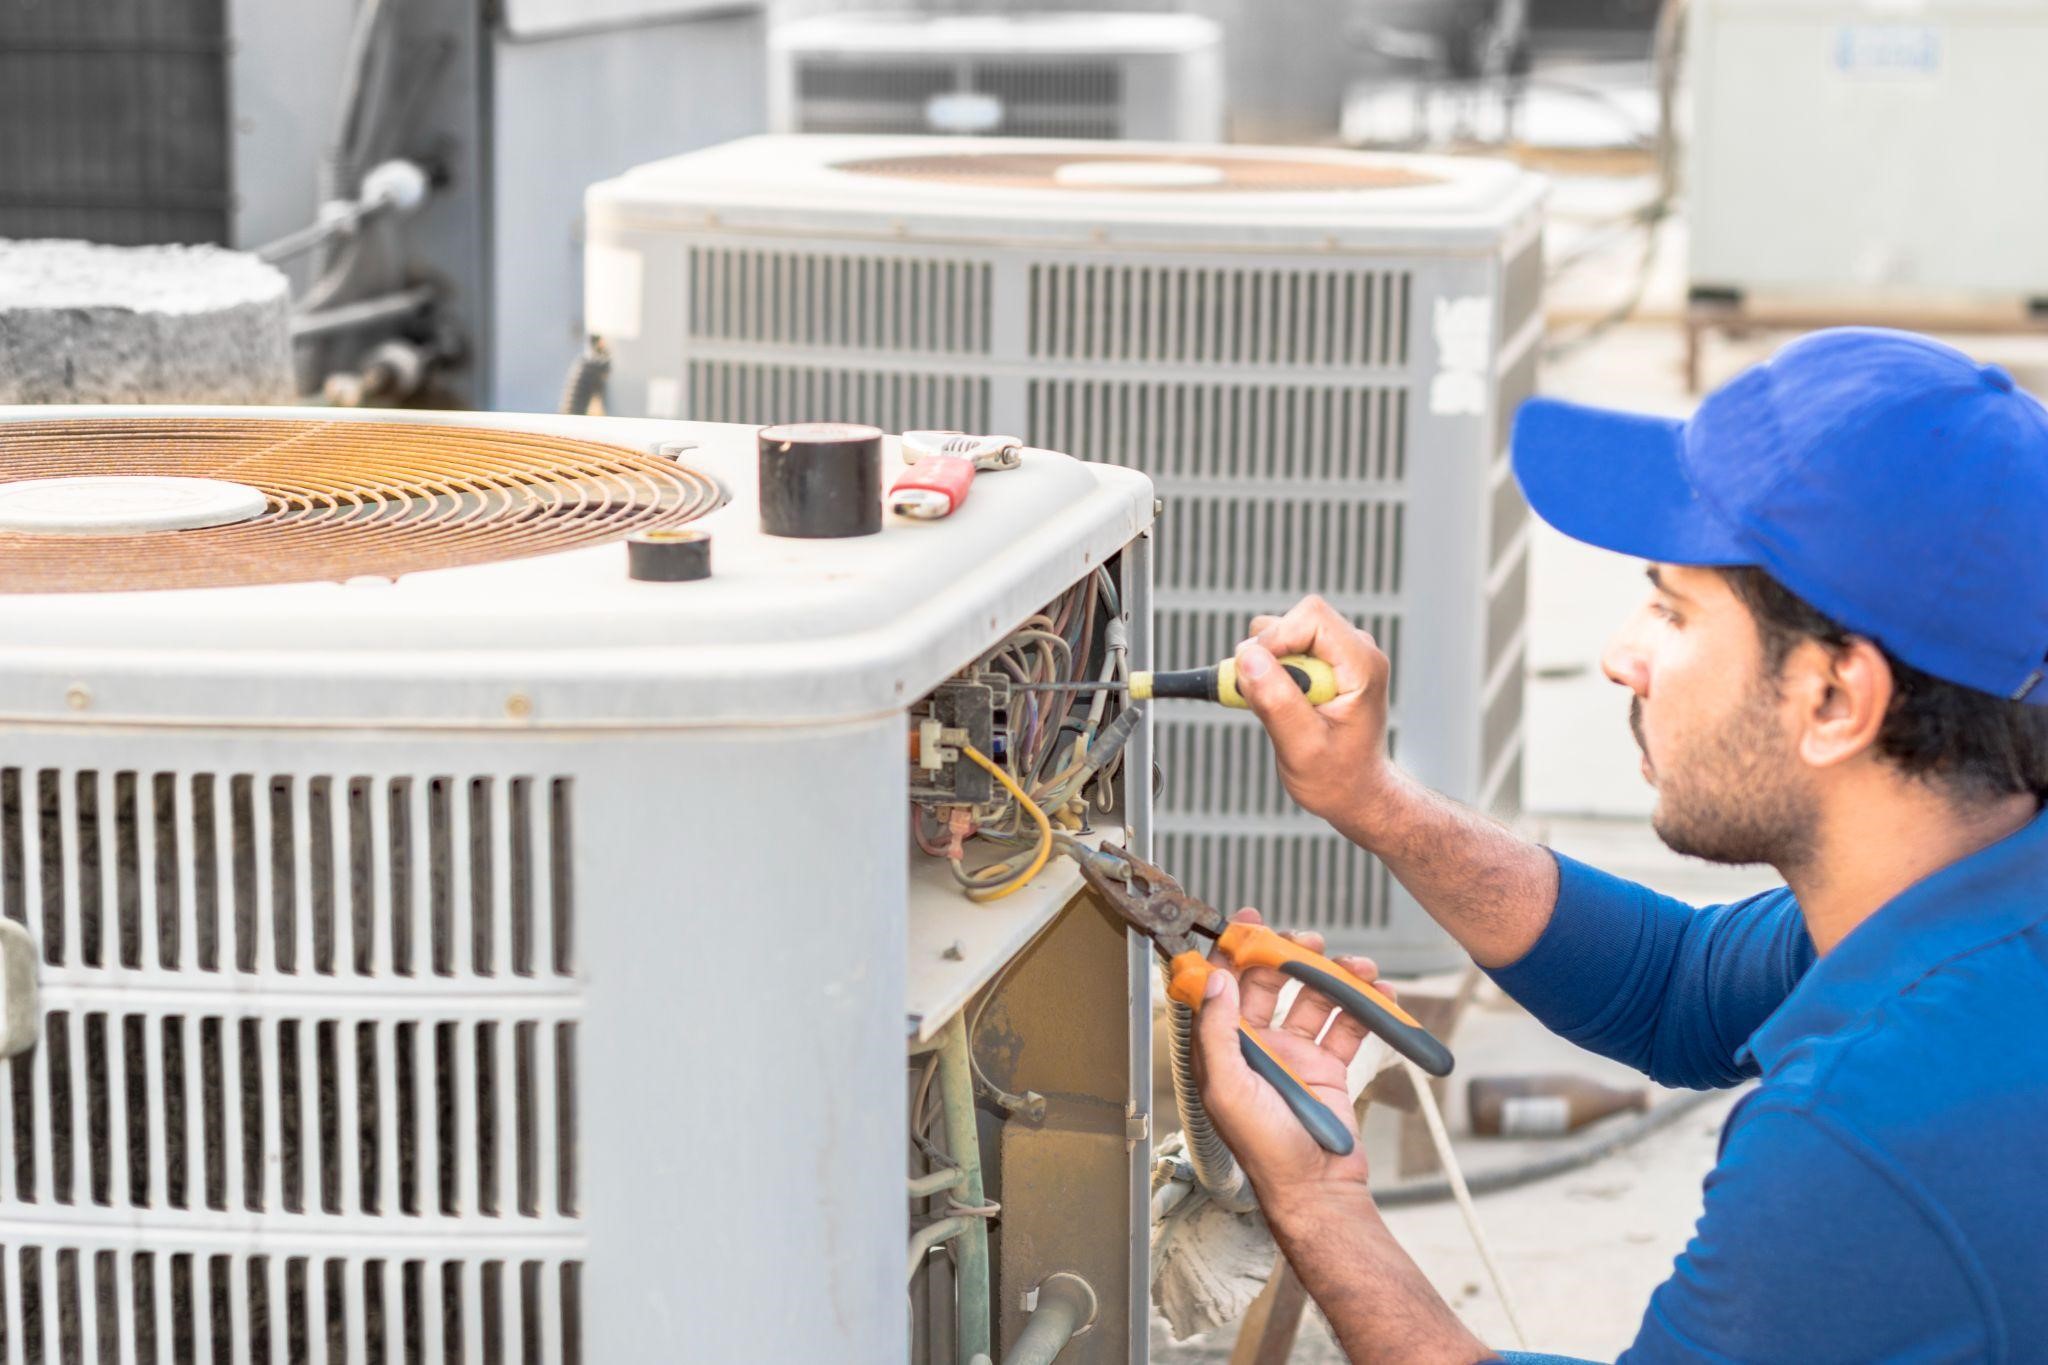 Become an HVAC professional with training from PCI.